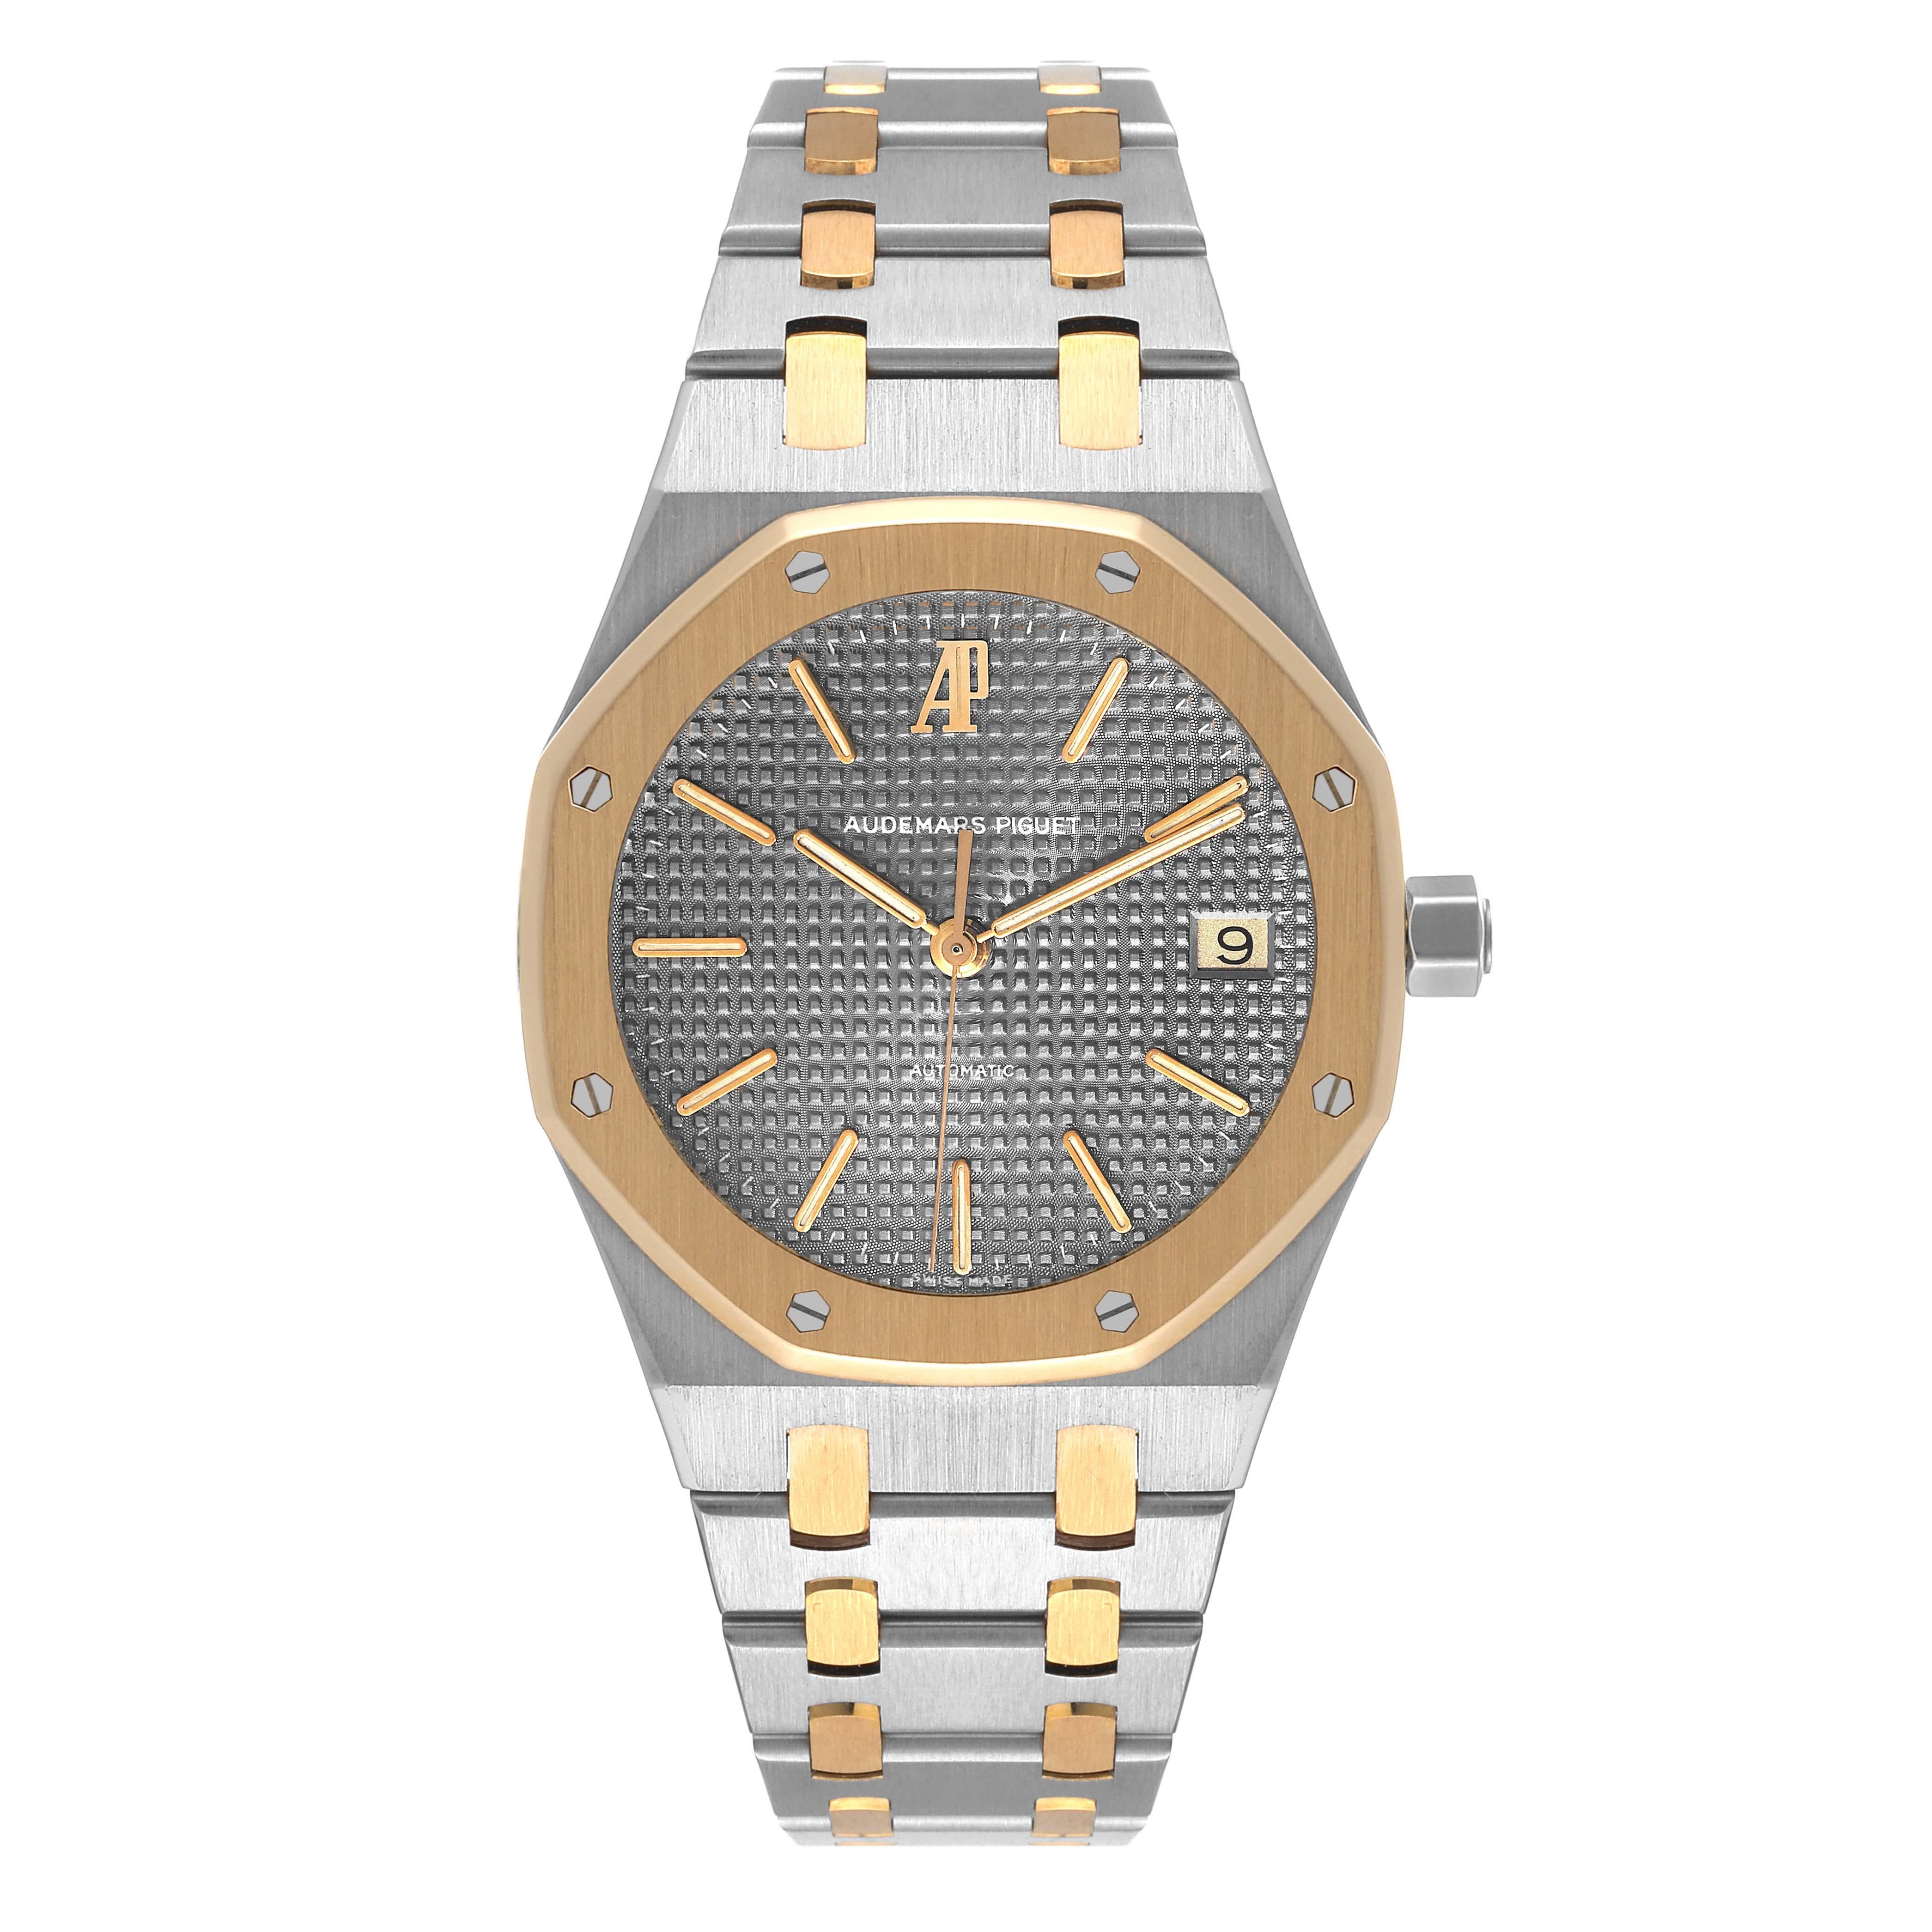 Audemars Piguet Royal Oak Steel Yellow Gold Mens Watch 14790SA. Automatic self-winding movement. Stainless steel and 18K yellow gold case 36.0 mm in diameter. 18K yellow gold bezel punctuated with 8 signature screws. Scratch resistant sapphire